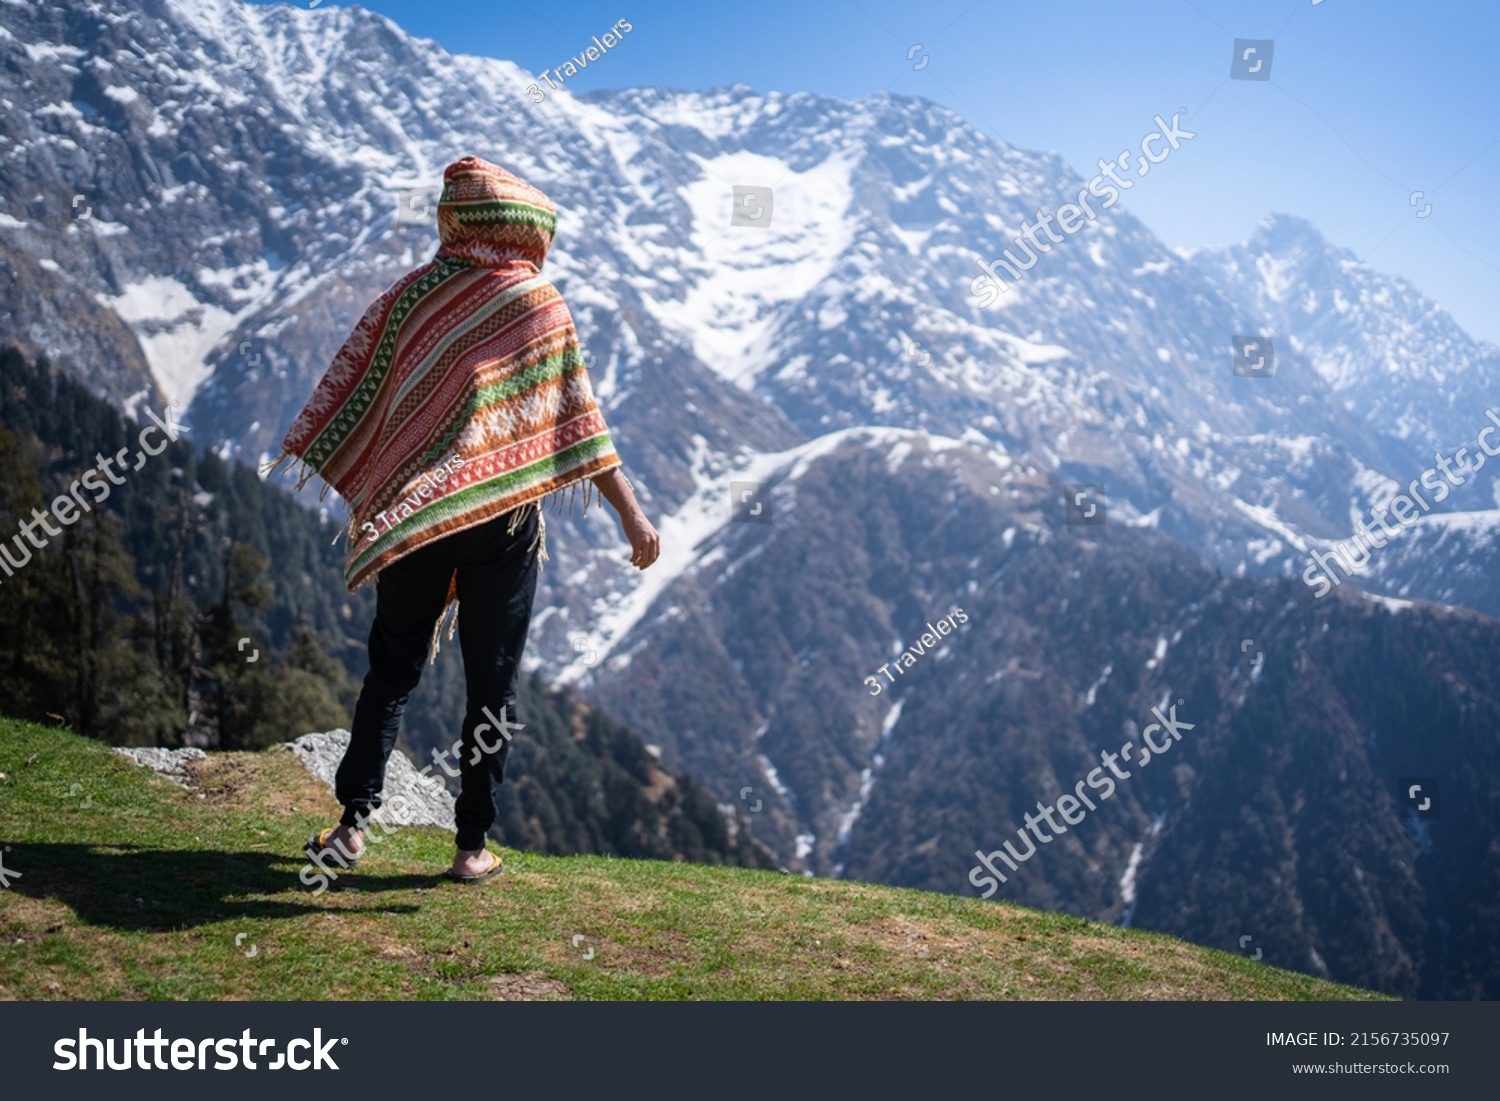 Hiker with local dress on the slope against the background of high snow-capped mountains of Triund Trek, Himachal Pradesh, India. #2156735097